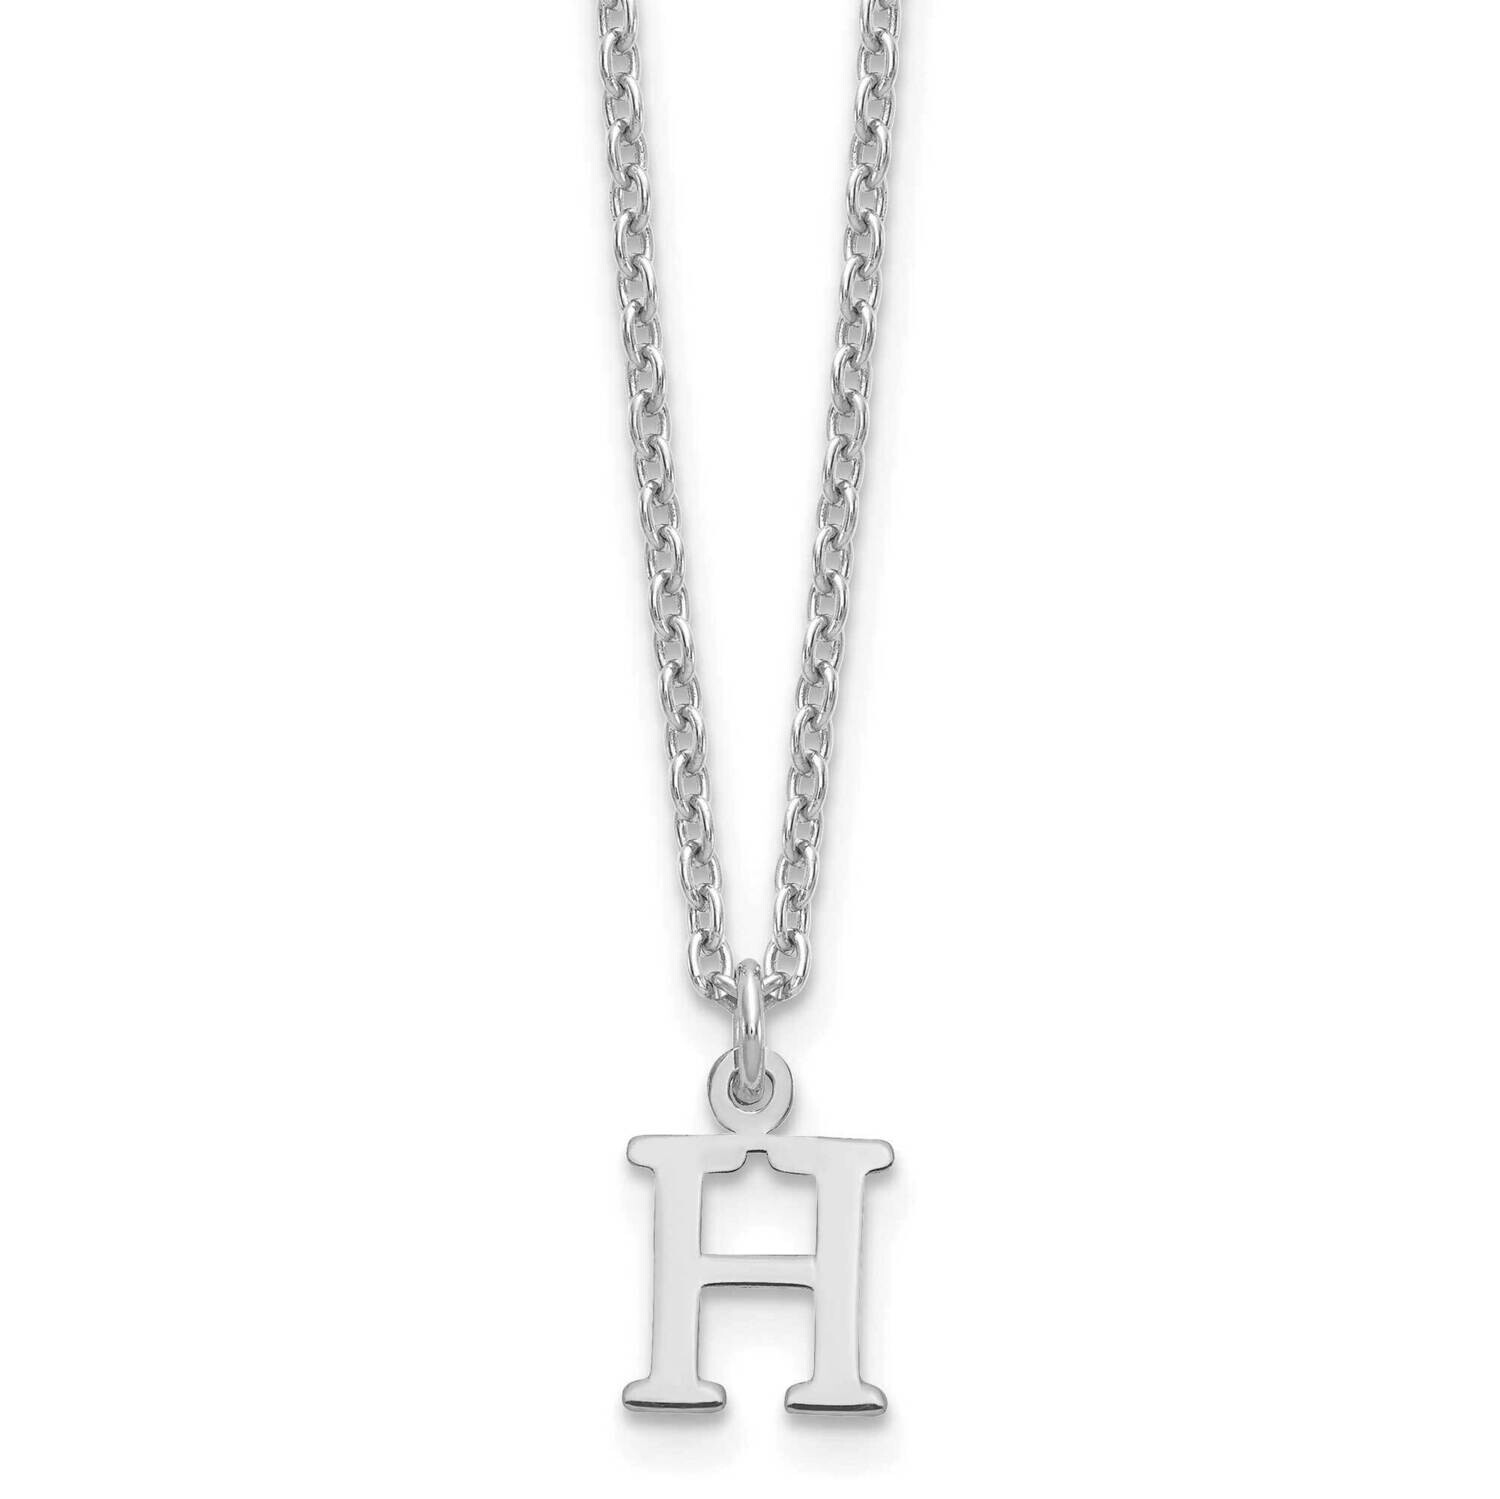 Cutout Letter H Initial Necklace Sterling Silver Rhodium-Plated XNA727SS/H